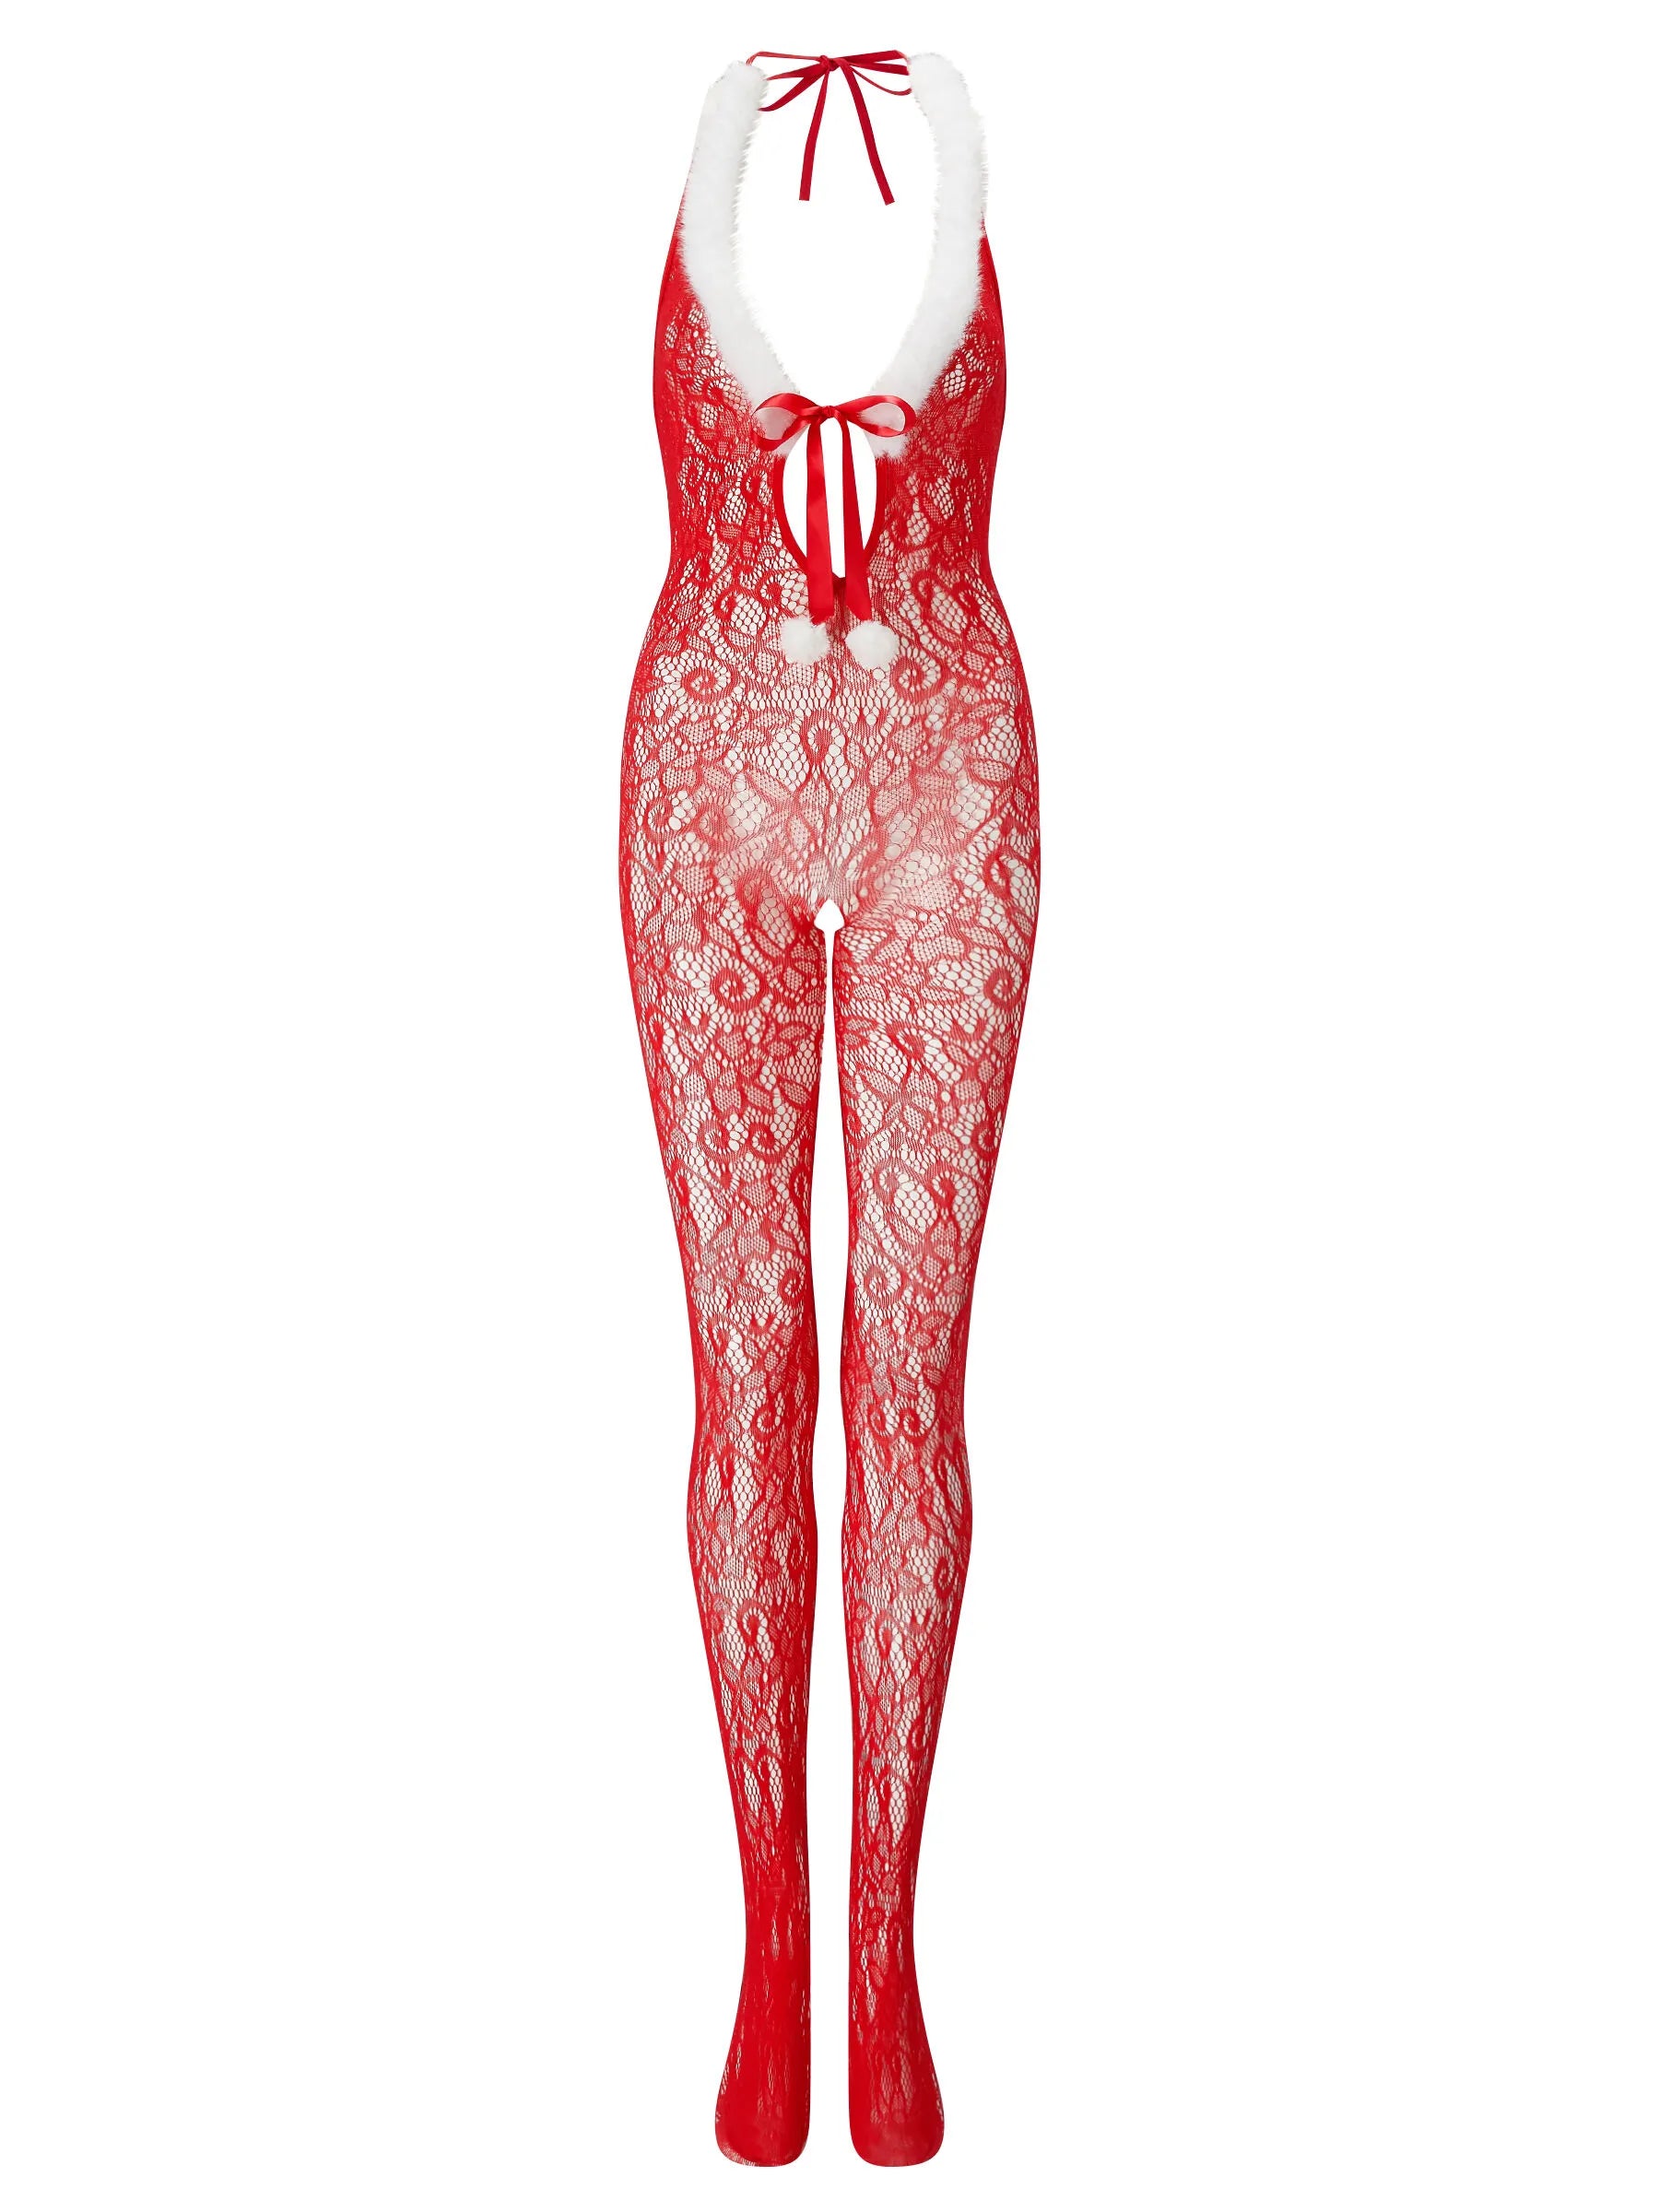 Winter Wonderland Crotchless Bodystocking From Ann Summers, Image 03